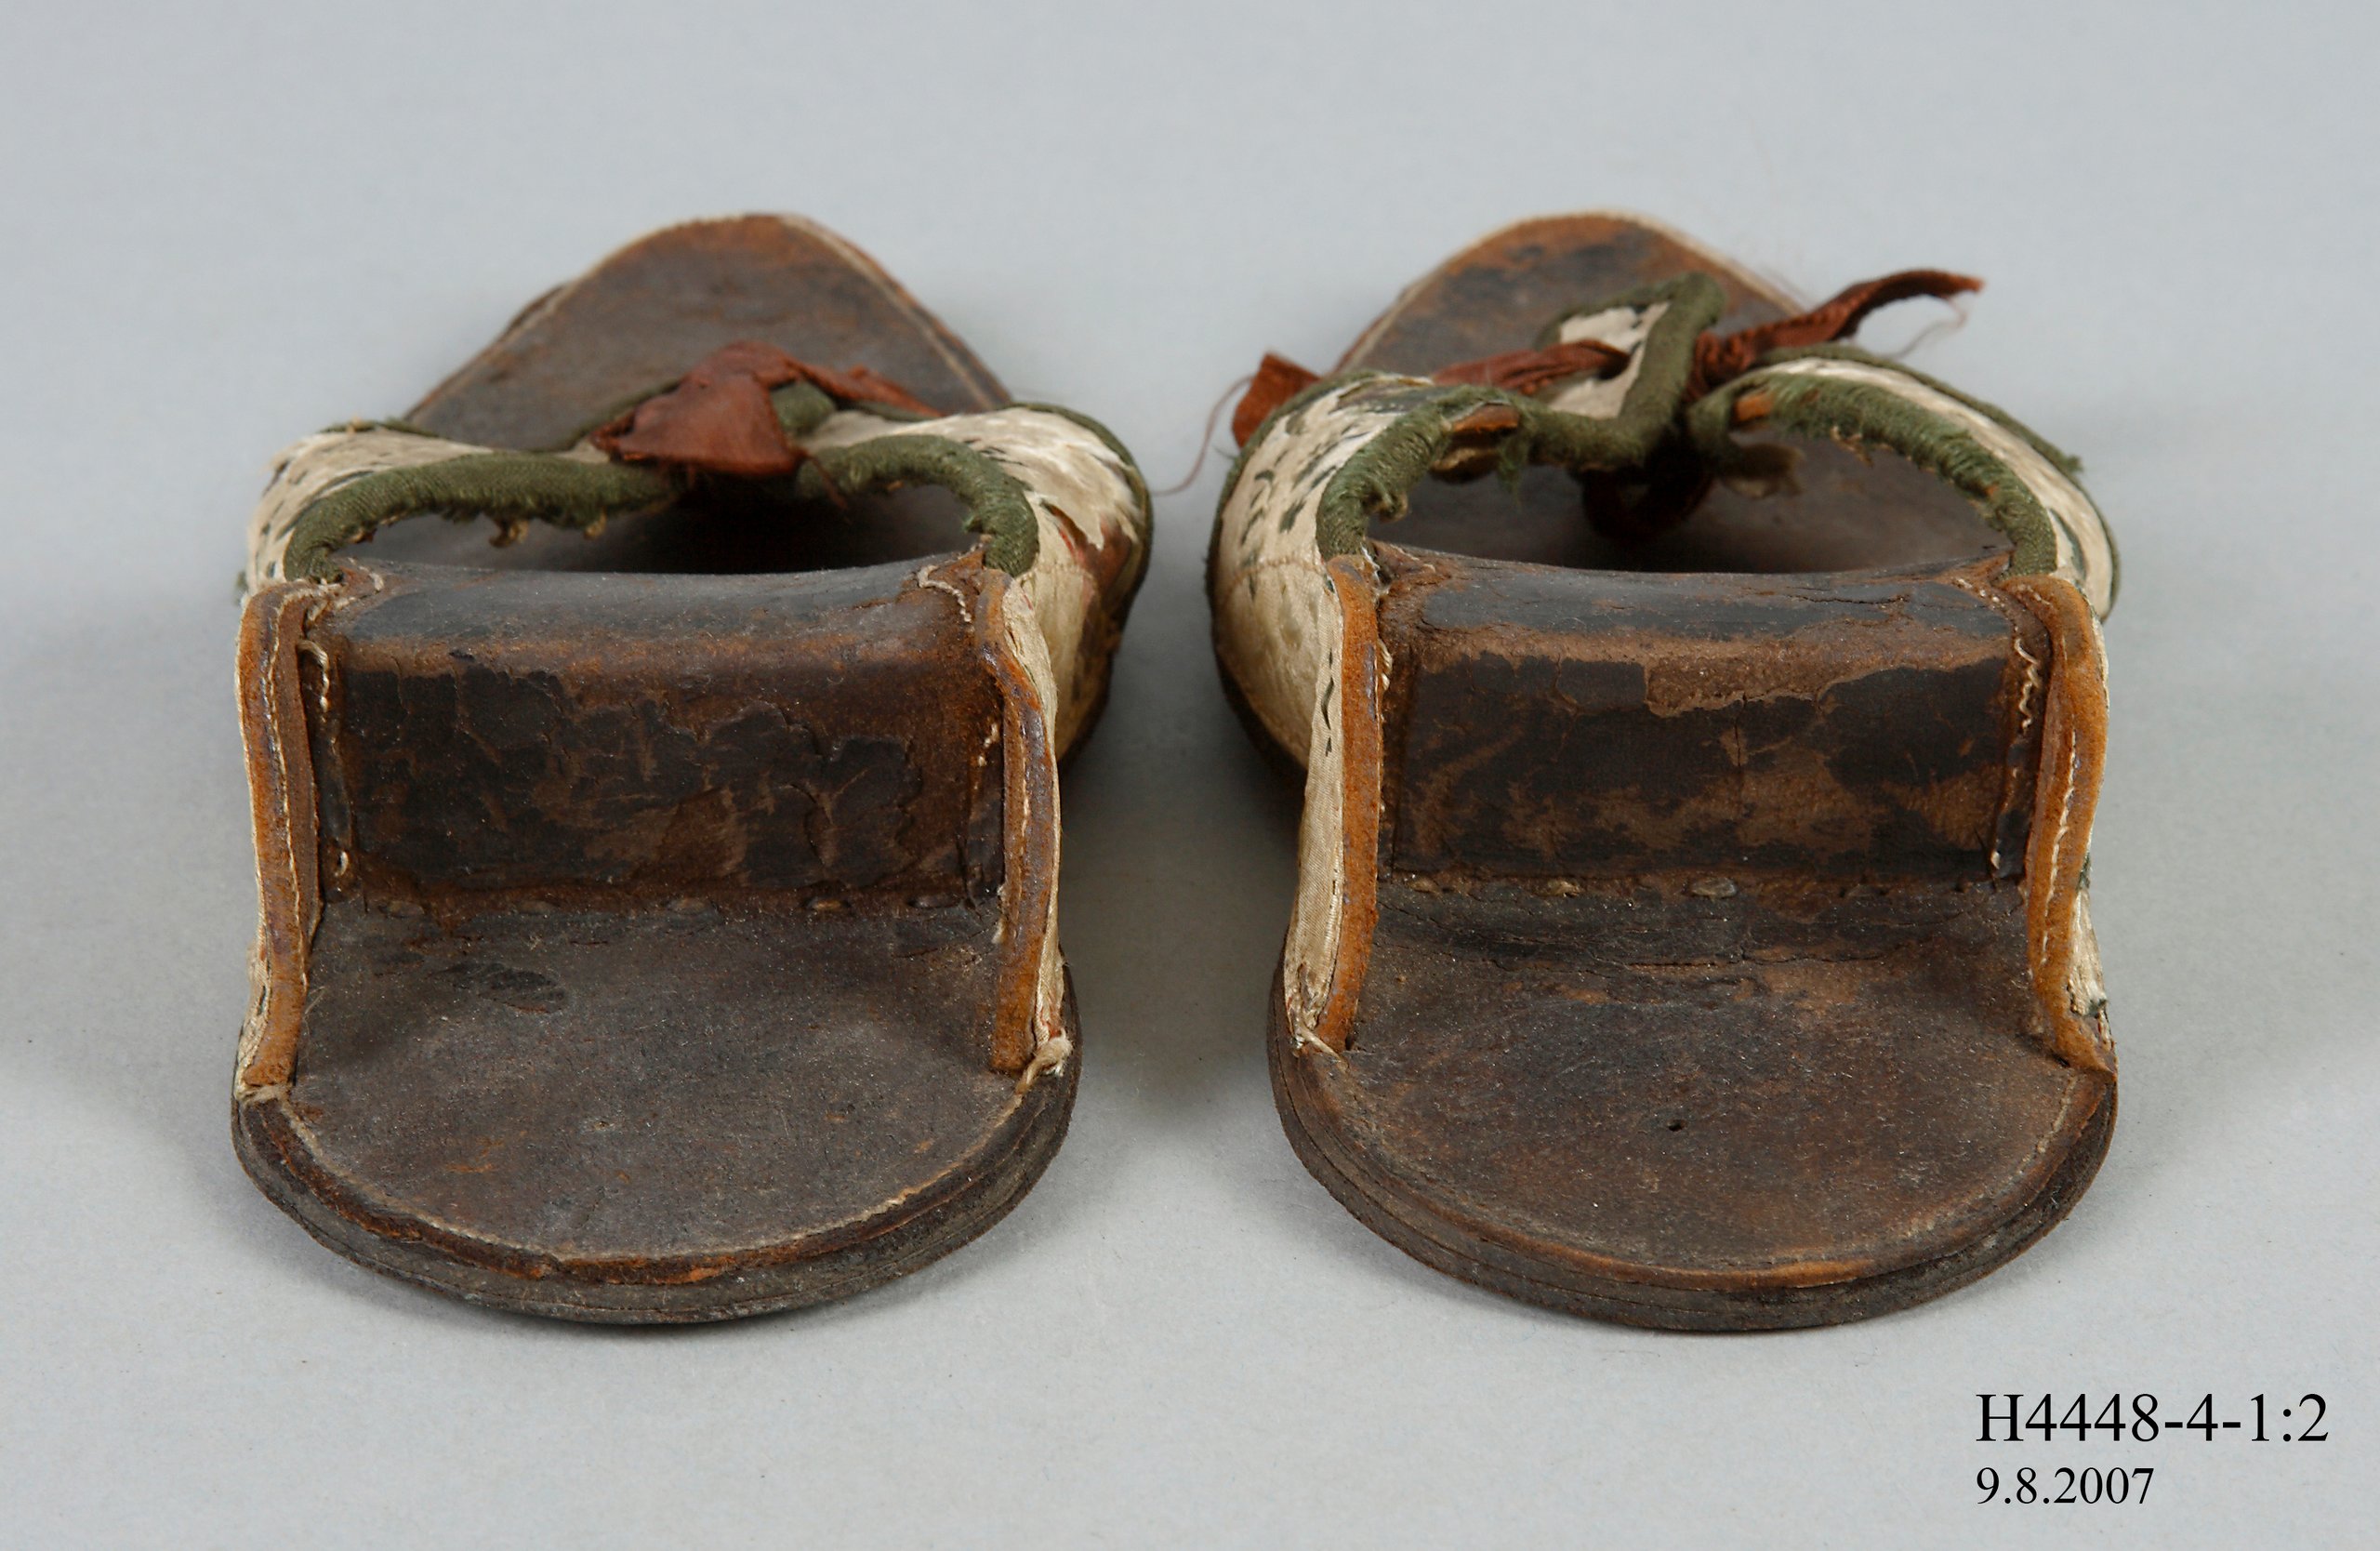 Pair of clog overshoes from the Joseph Box collection